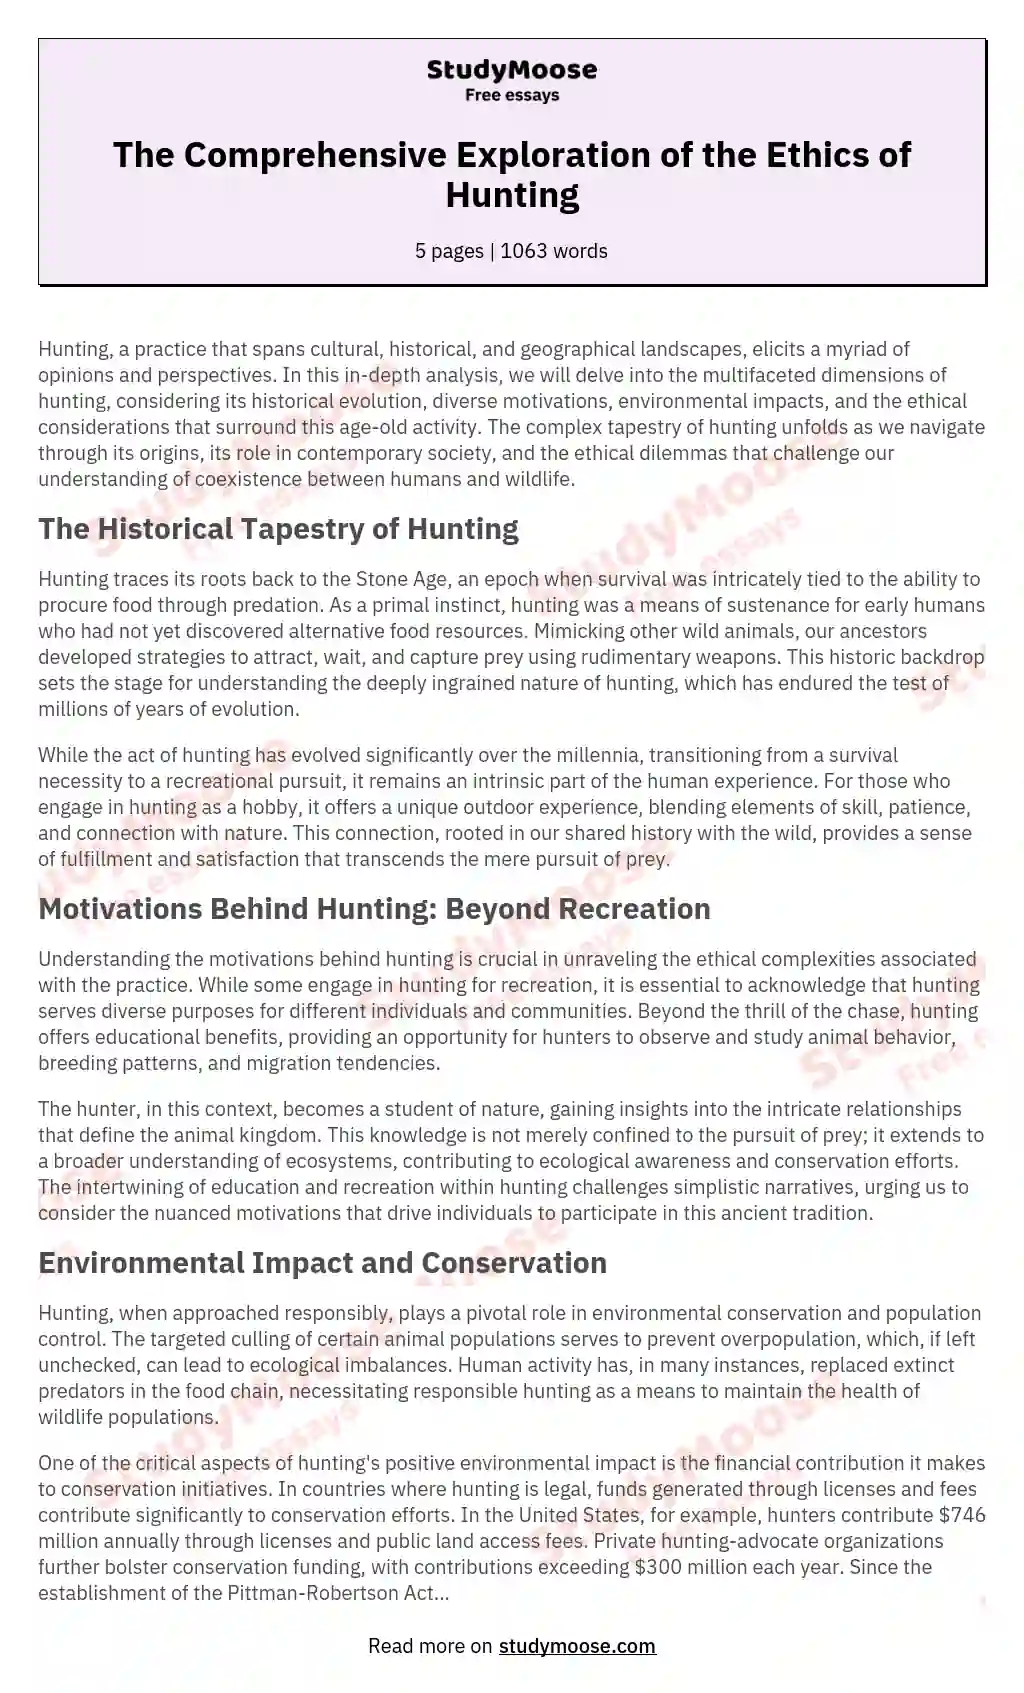 The Comprehensive Exploration of the Ethics of Hunting essay